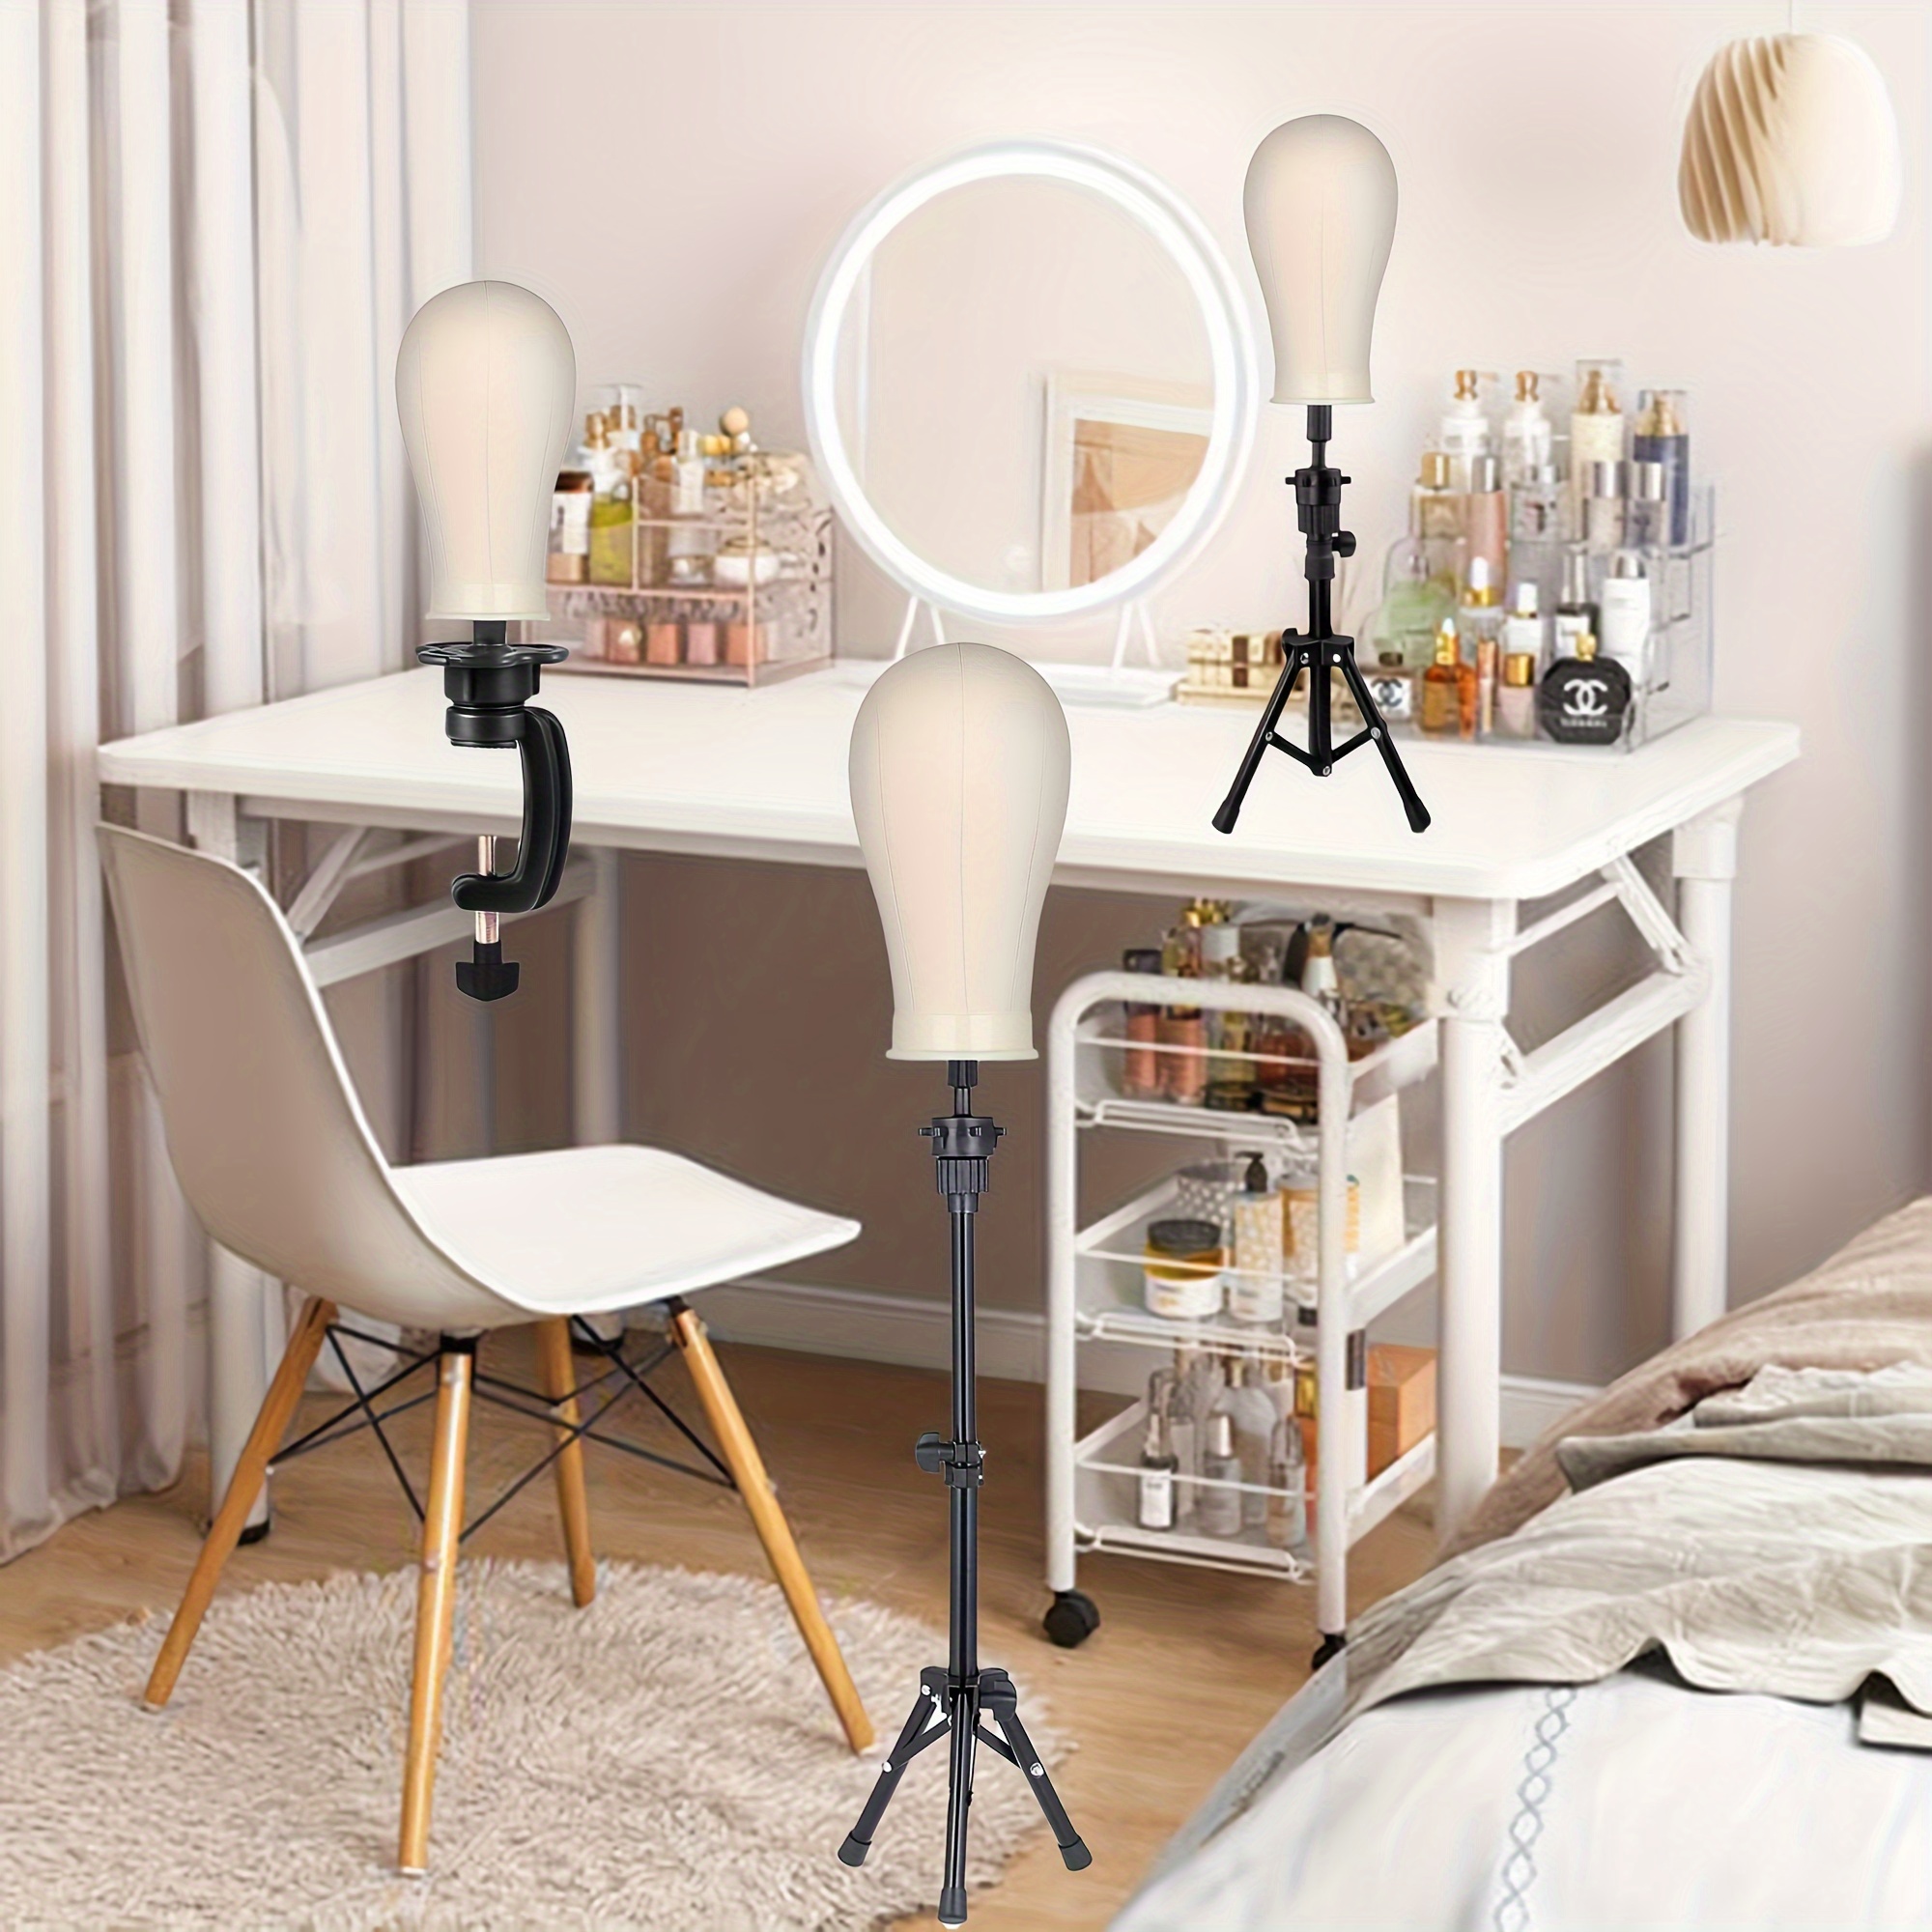  TopDirect 23 Inch Canvas Wig Head Stand, Wig Stand Tripod with  Head, Mannequin Head for Wigs, Manikin Canvas Block Head Set Making Display  with Wig caps, T Pins Kit : Beauty